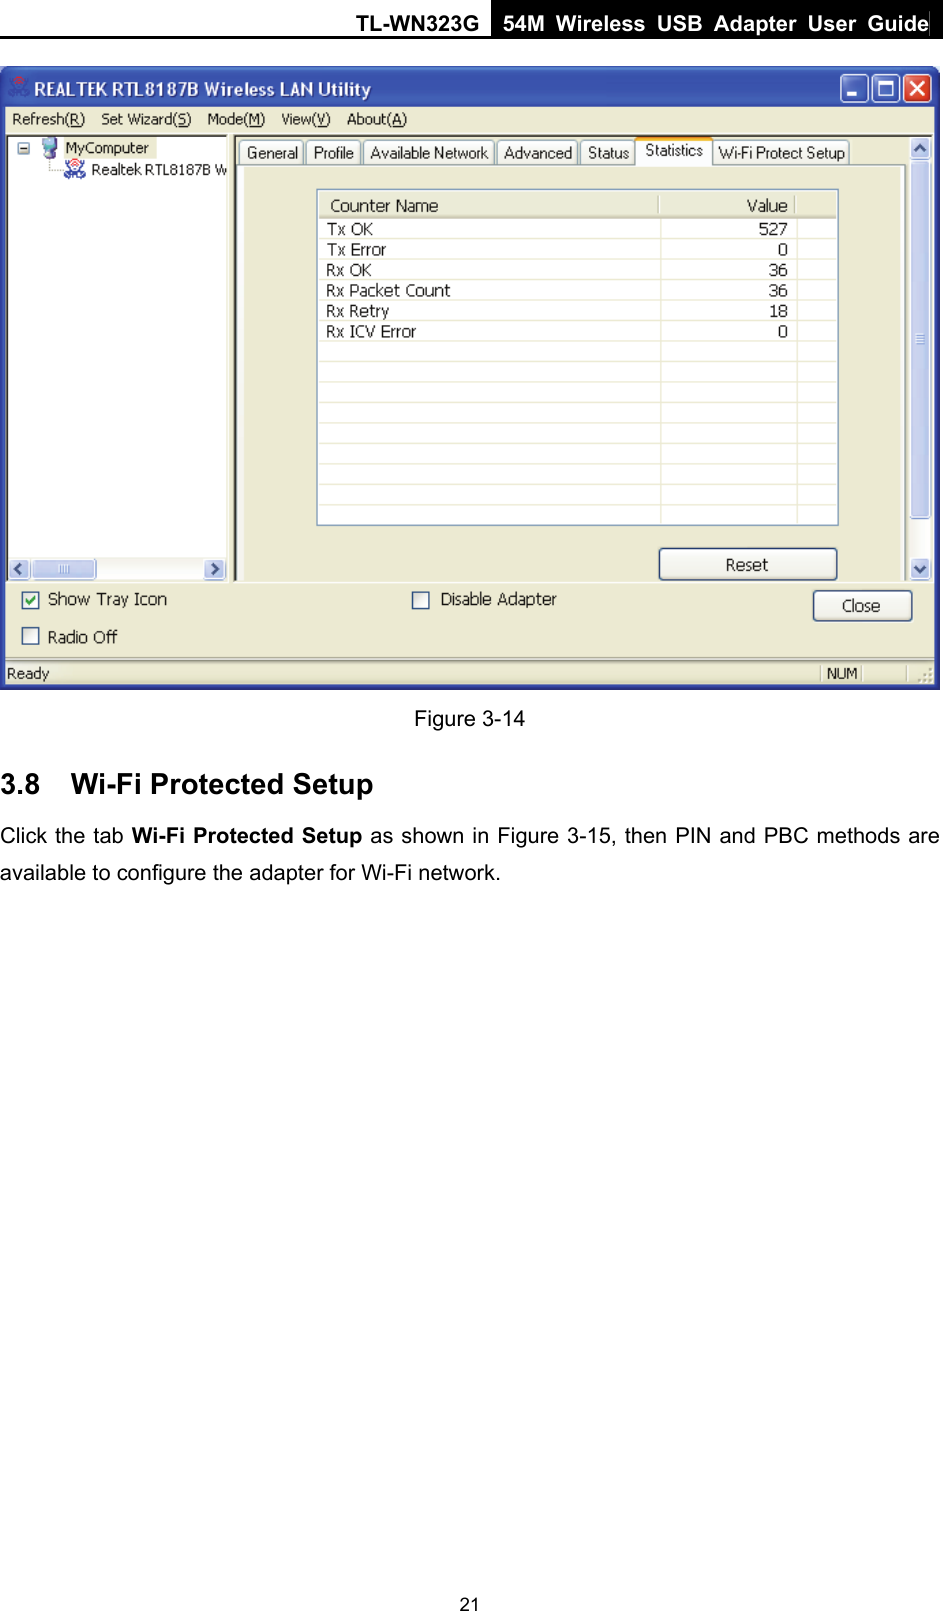 TL-WN323G 54M Wireless USB Adapter User Guide   21 Figure 3-14 3.8  Wi-Fi Protected Setup Click the tab Wi-Fi Protected Setup as shown in Figure 3-15, then PIN and PBC methods are available to configure the adapter for Wi-Fi network. 